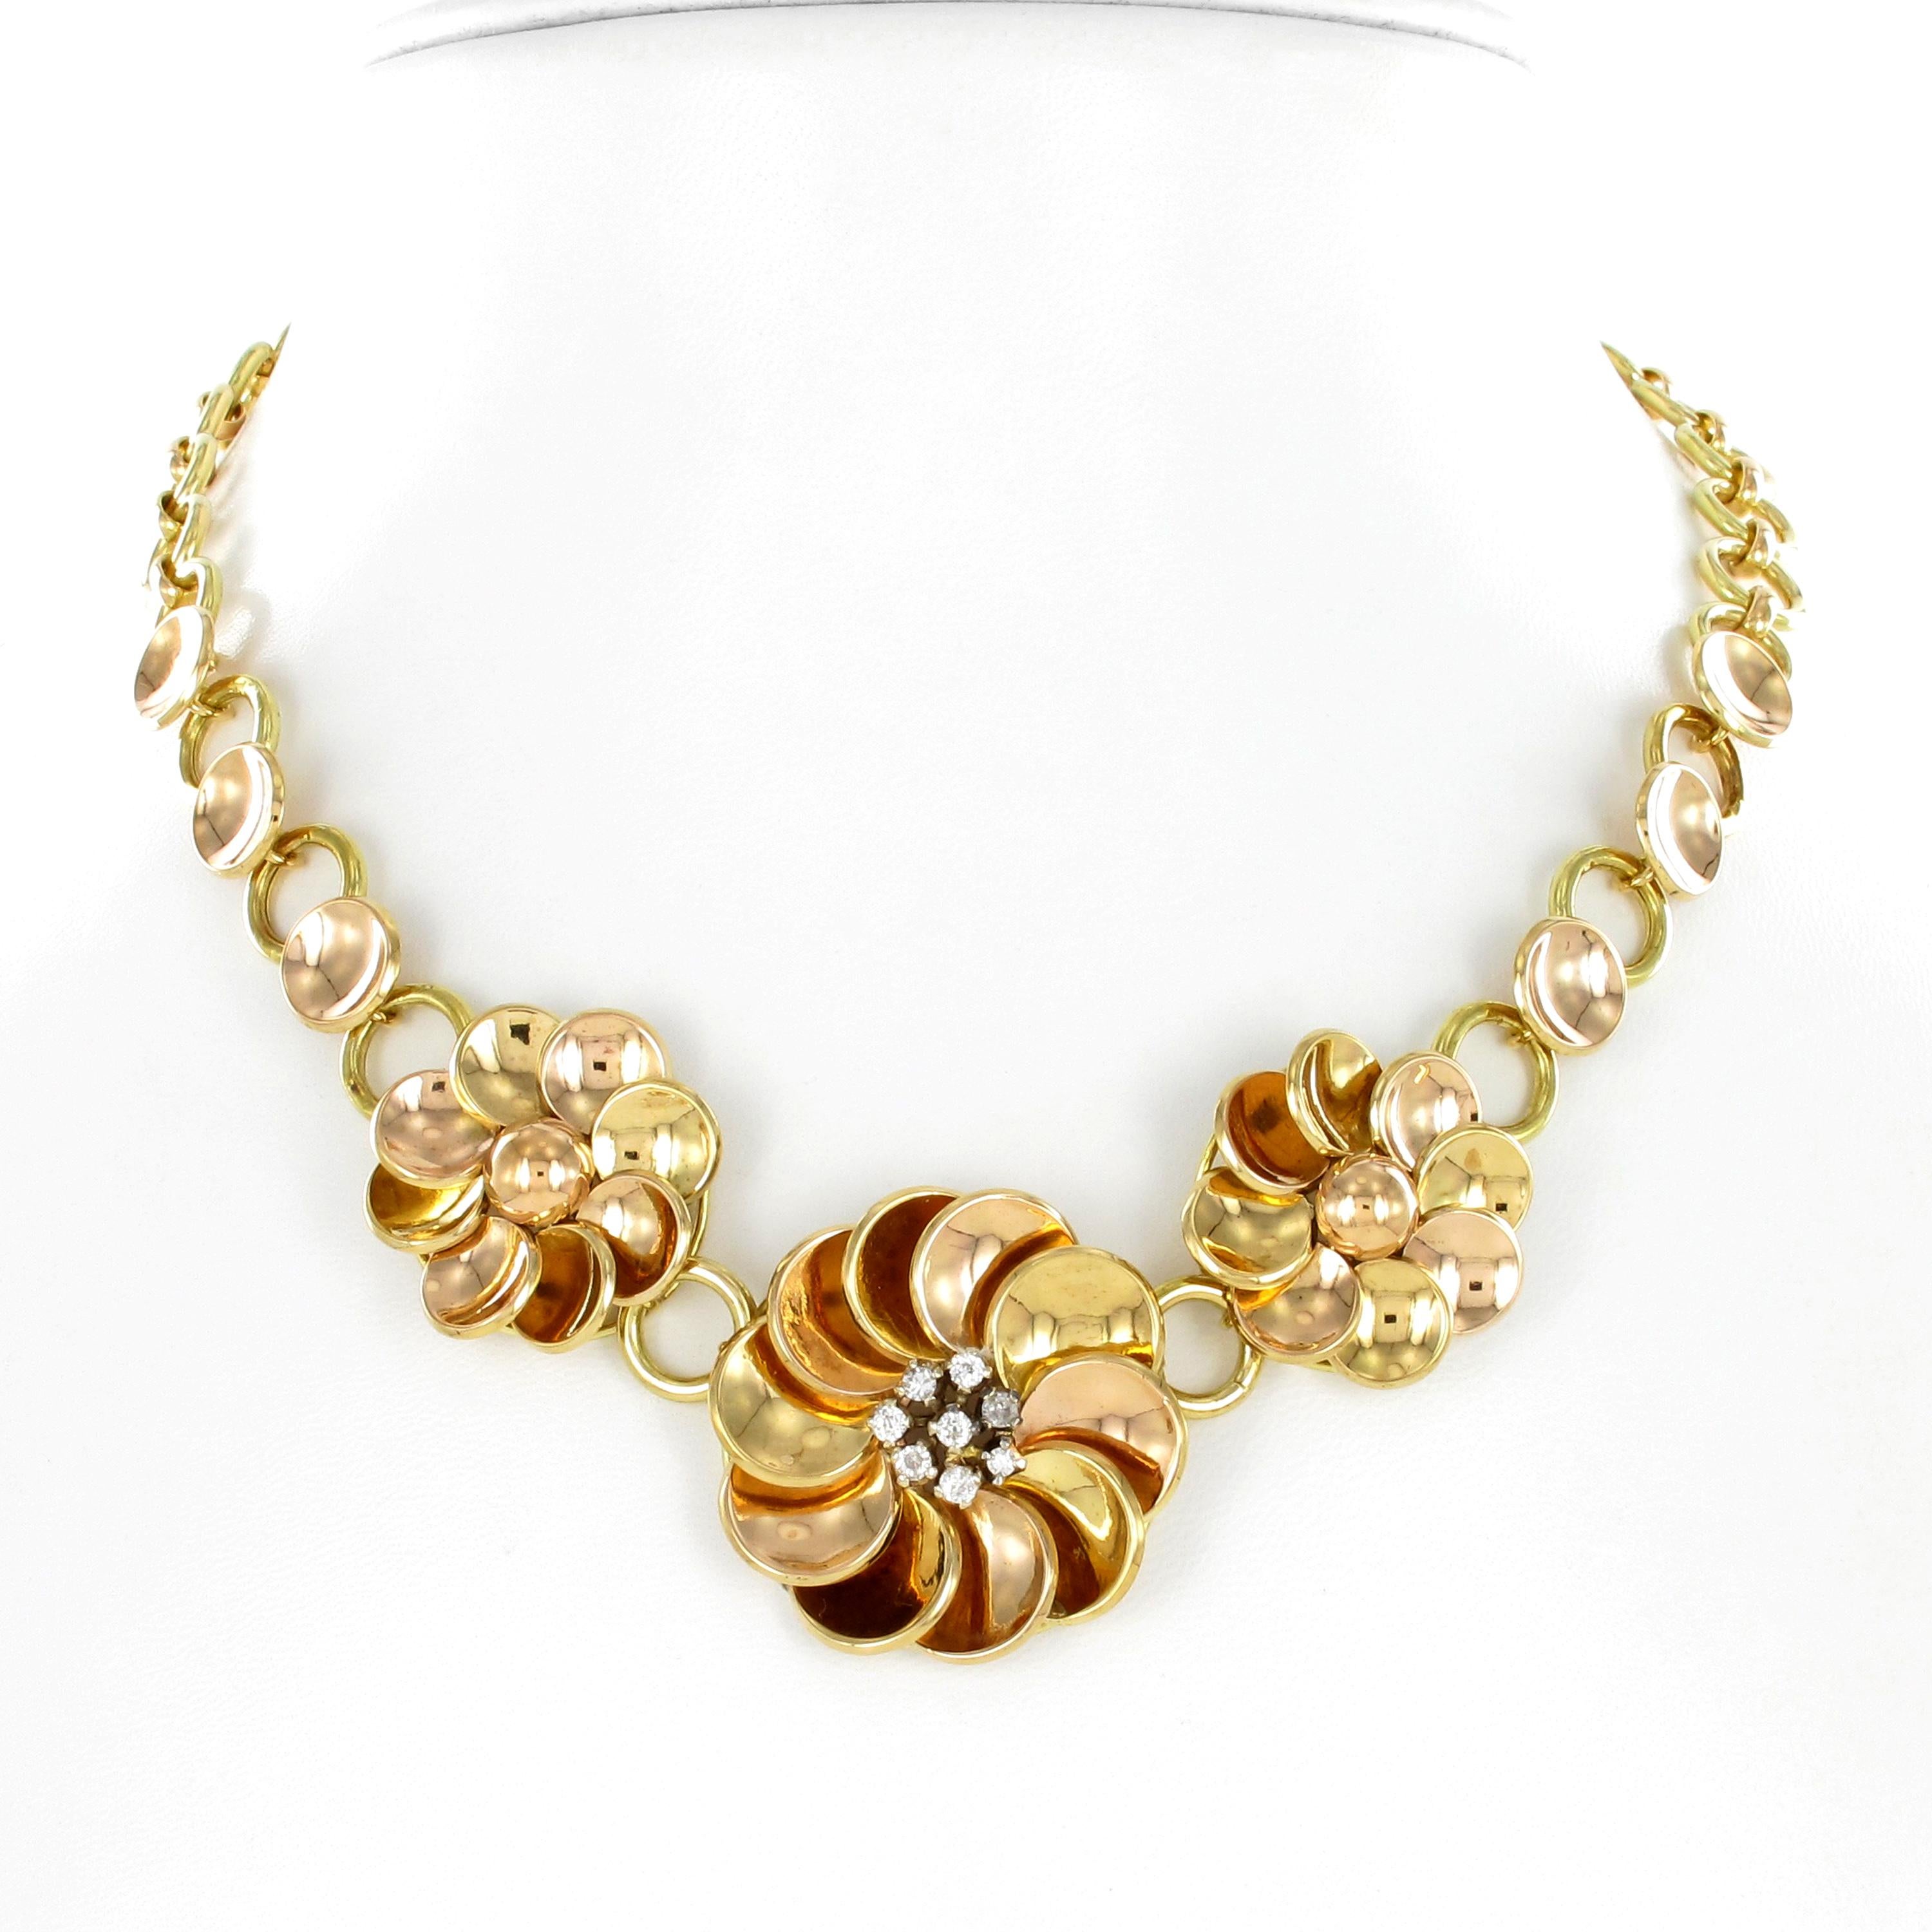 This unique Retro flower necklace is carefully crafted in 18 karat yellow and rose gold. The centre consists of three generously sized round flowers with leaves alternately worked in rose and yellow gold and arranged in a rosette shape. The pistils